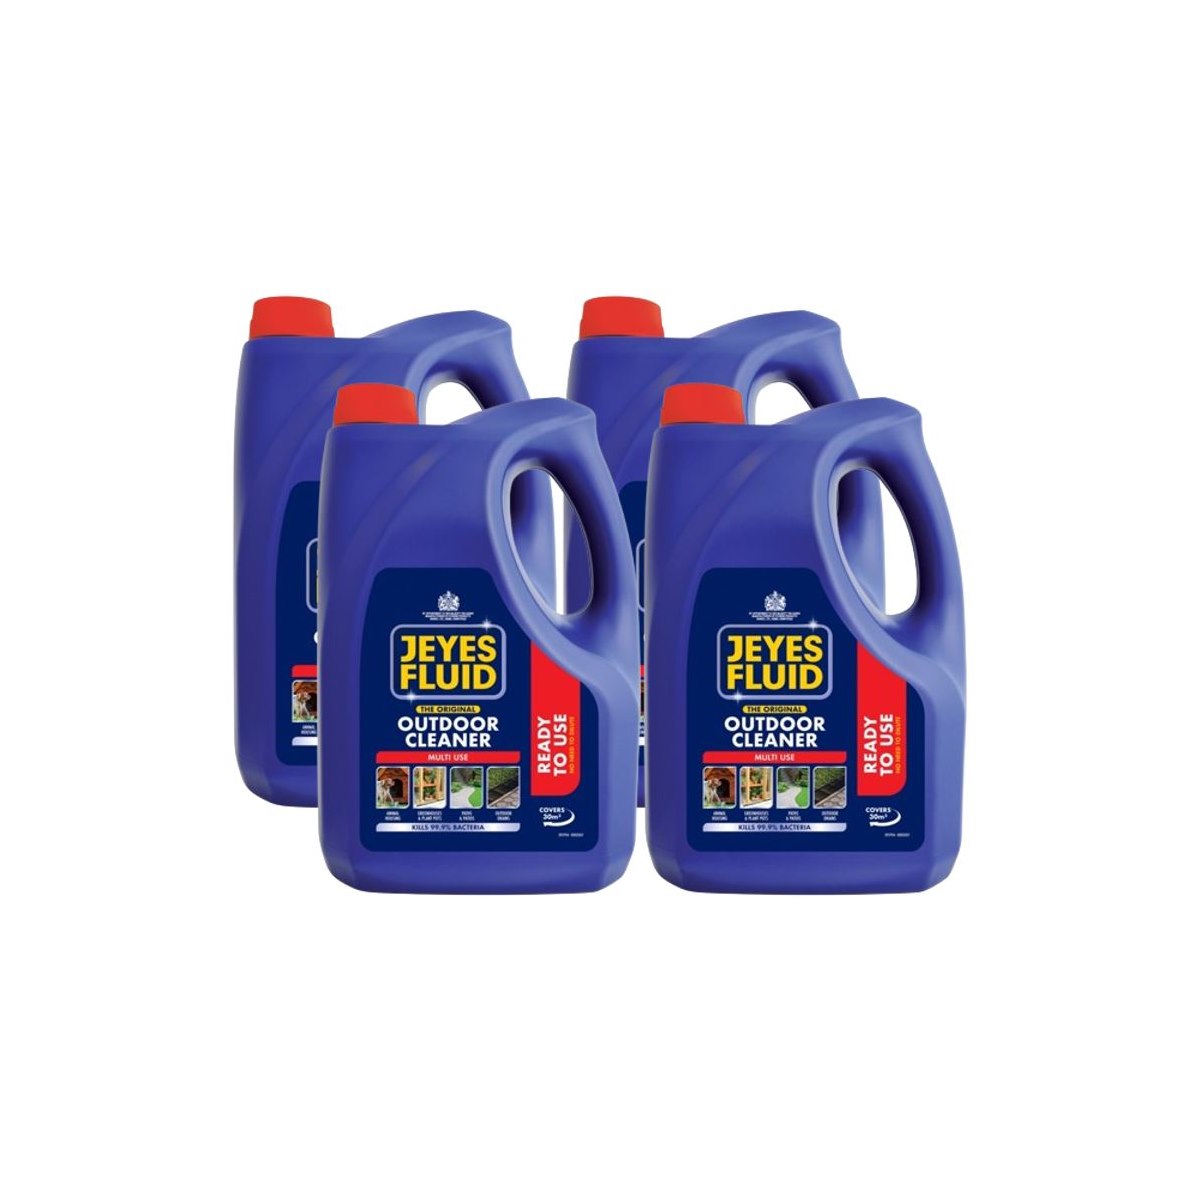 Case of 4 x Jeyes Fluid Ready to Use Outdoor Cleaner 4L